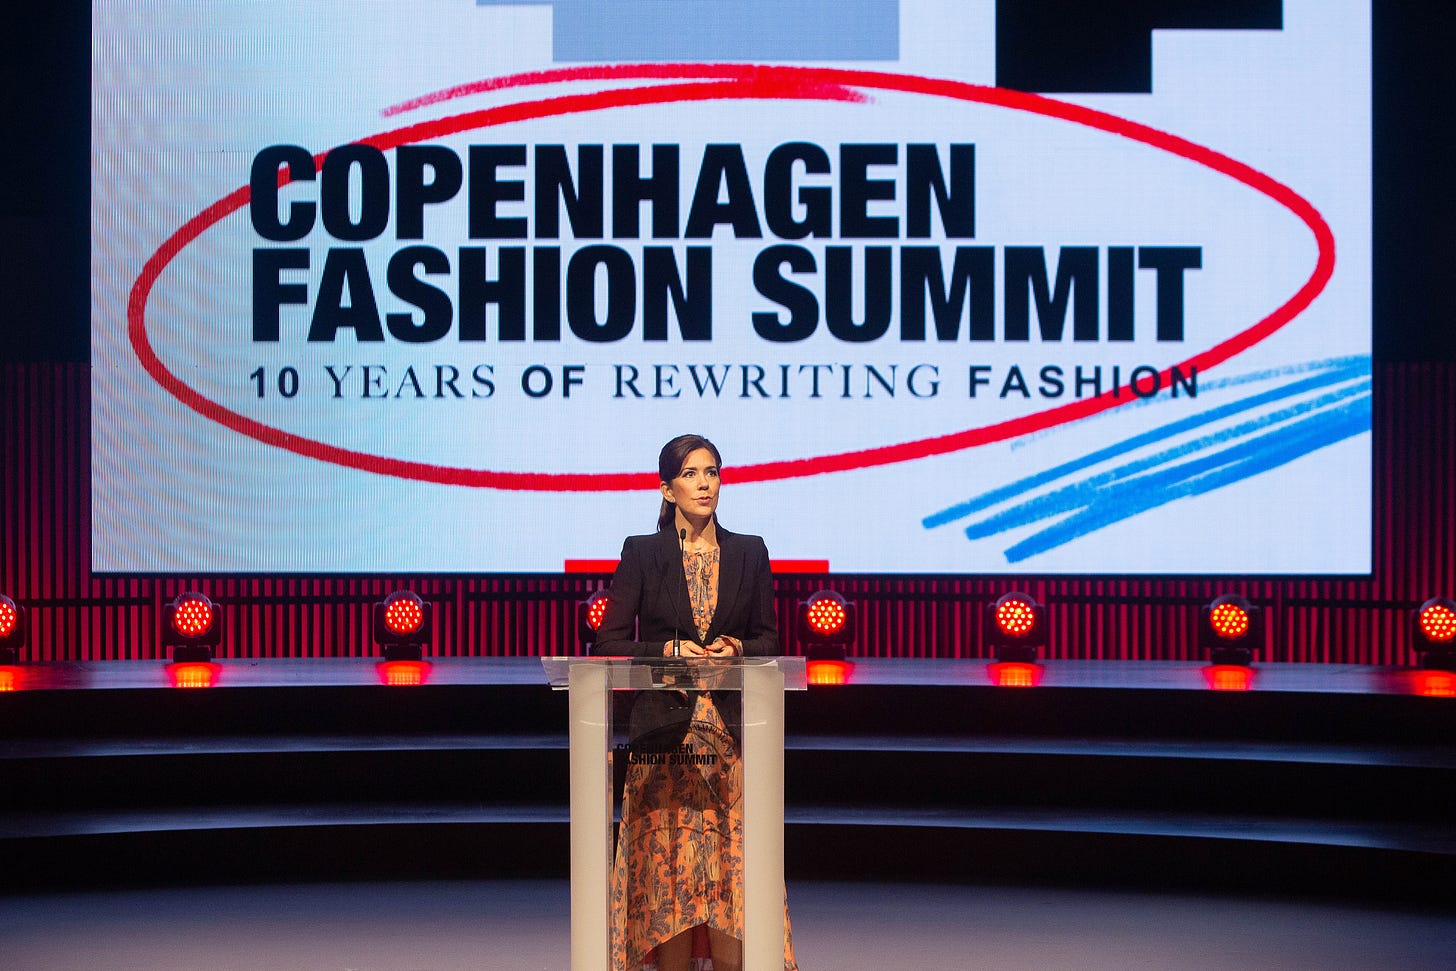 crown princess mary gives speech at fashion summit in copenhagen